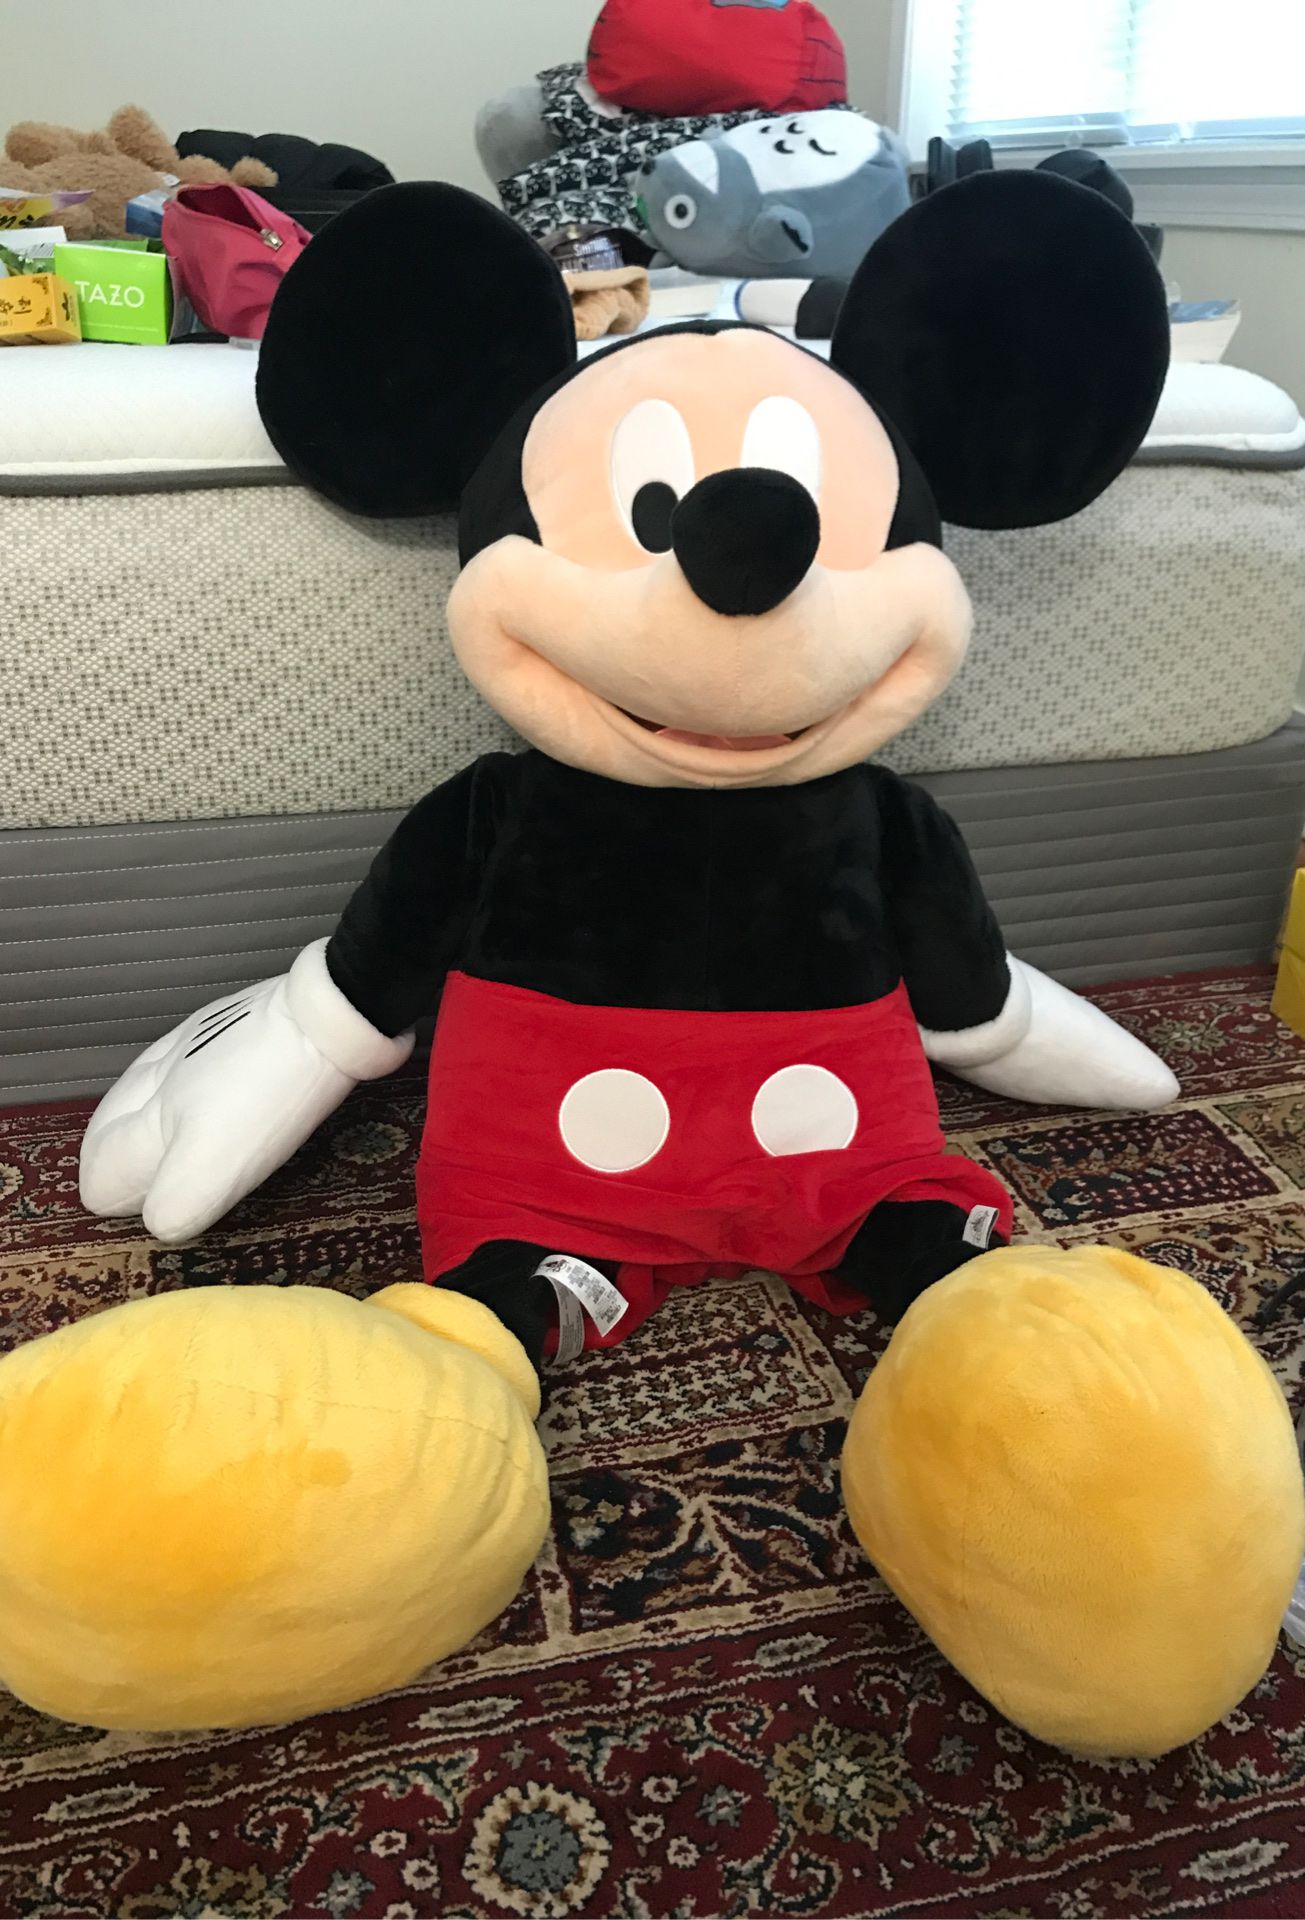 Large Mickey Mouse